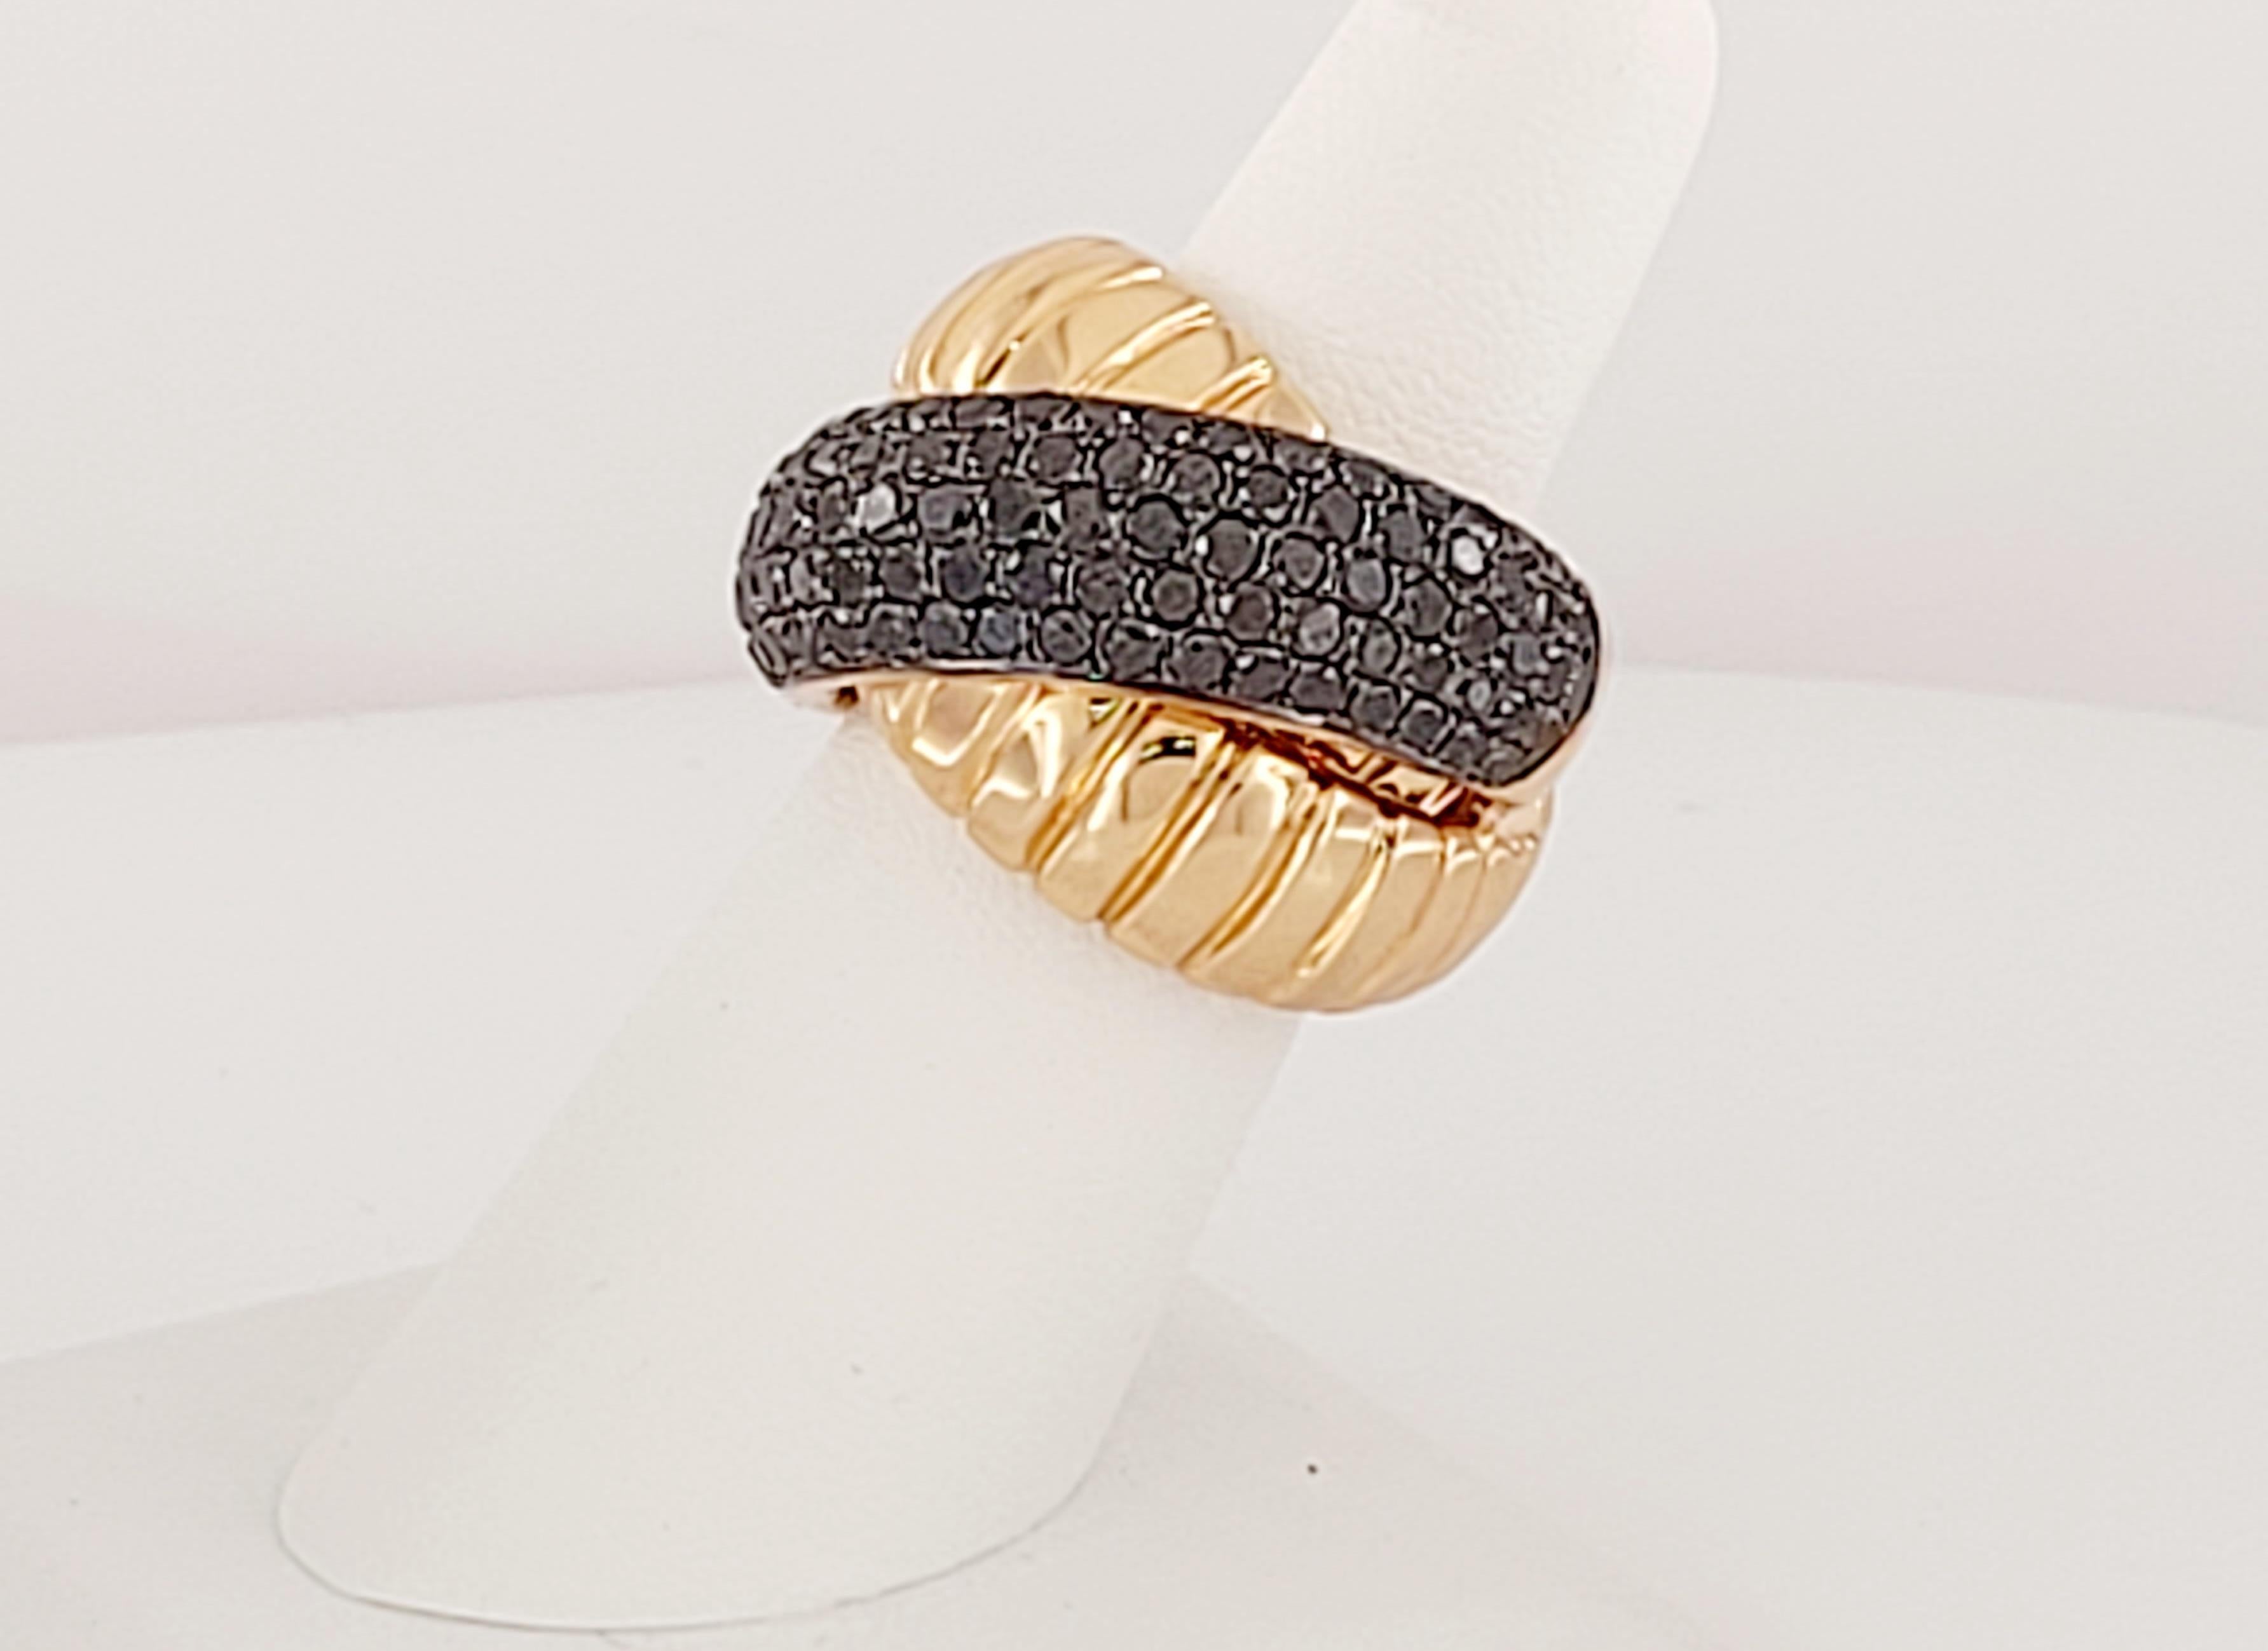 Unbranded 18K Rose Gold ring 
Black Diamonds 
Diamonds 3.50ct
Ring Size 6.5 
Weight 24gr
Gender Women 
Condition New, without tags
Retail Price: $6900